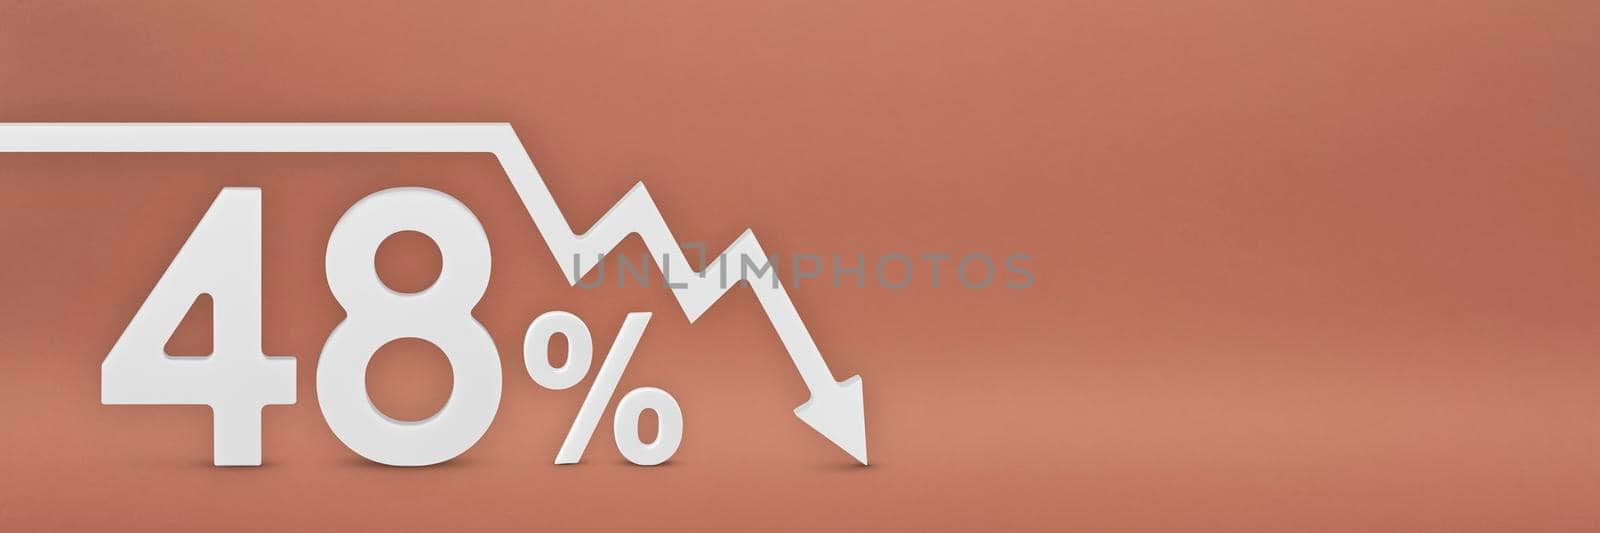 forty-eight percent, the arrow on the graph is pointing down. Stock market crash, bear market, inflation.Economic collapse, collapse of stocks.3d banner,48 percent discount sign on a red background